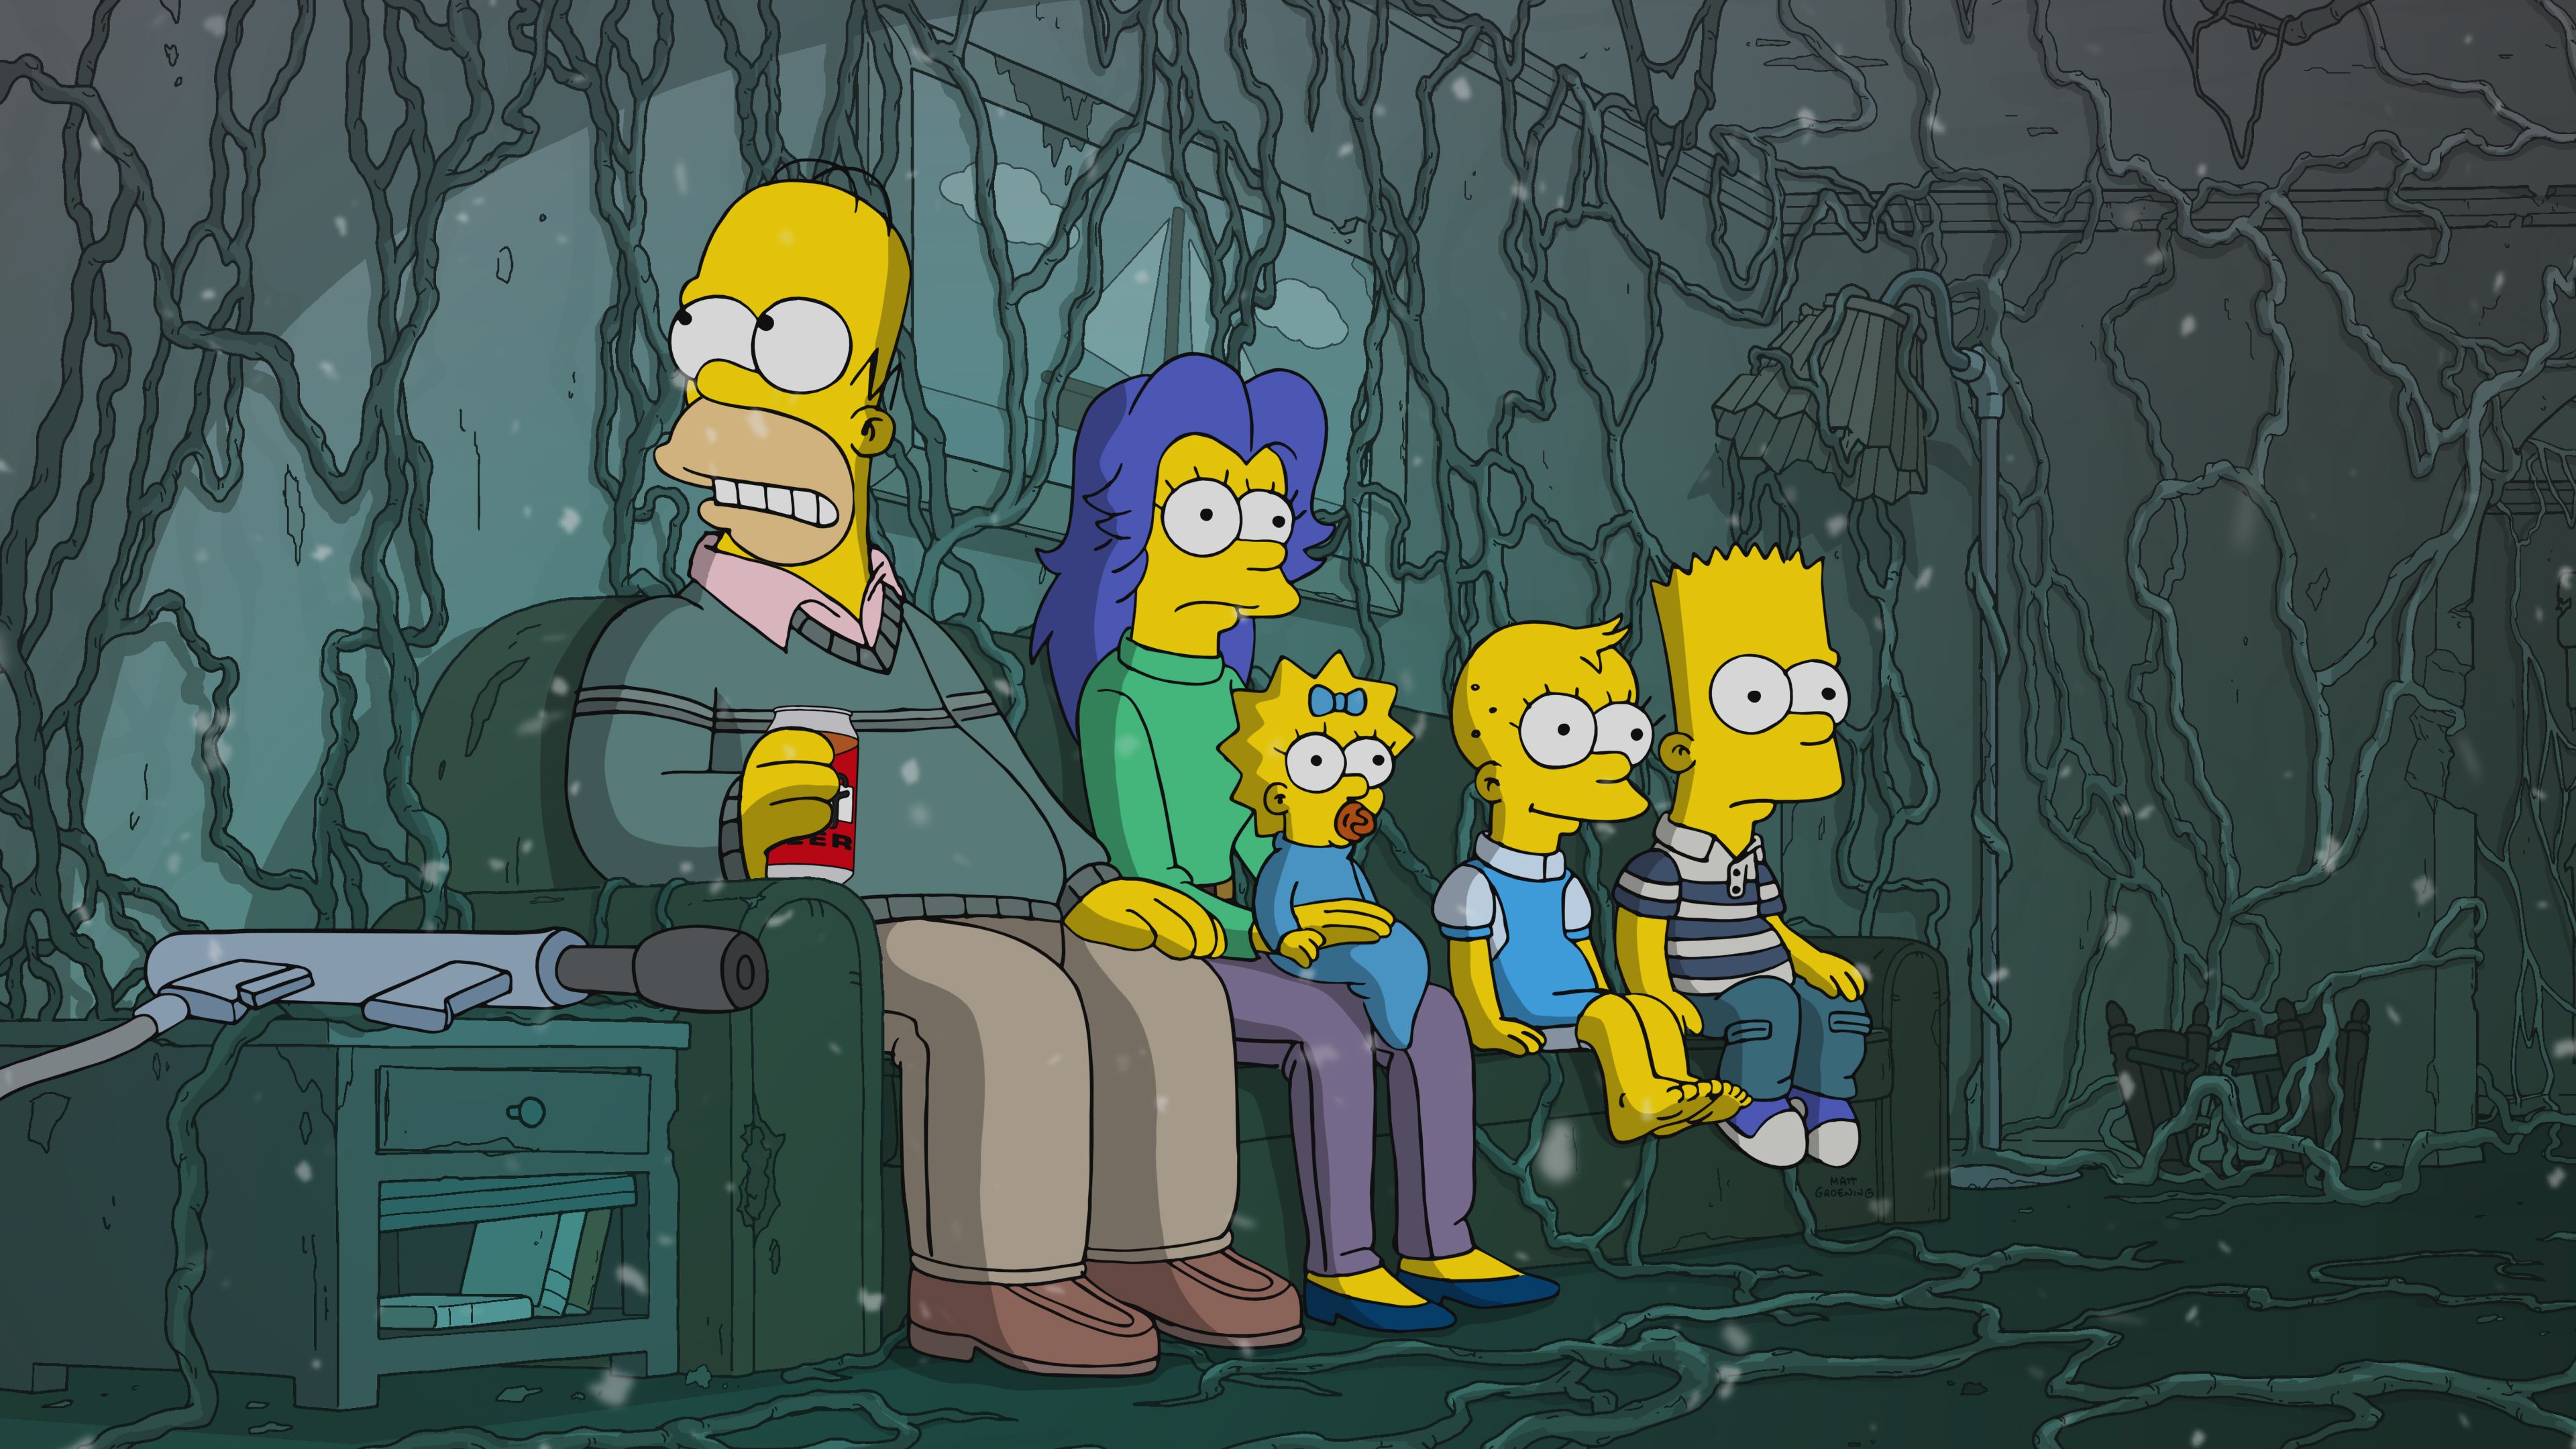 The Simpsons Treehouse of Horror Parodying Death Note  Sankaku Complex